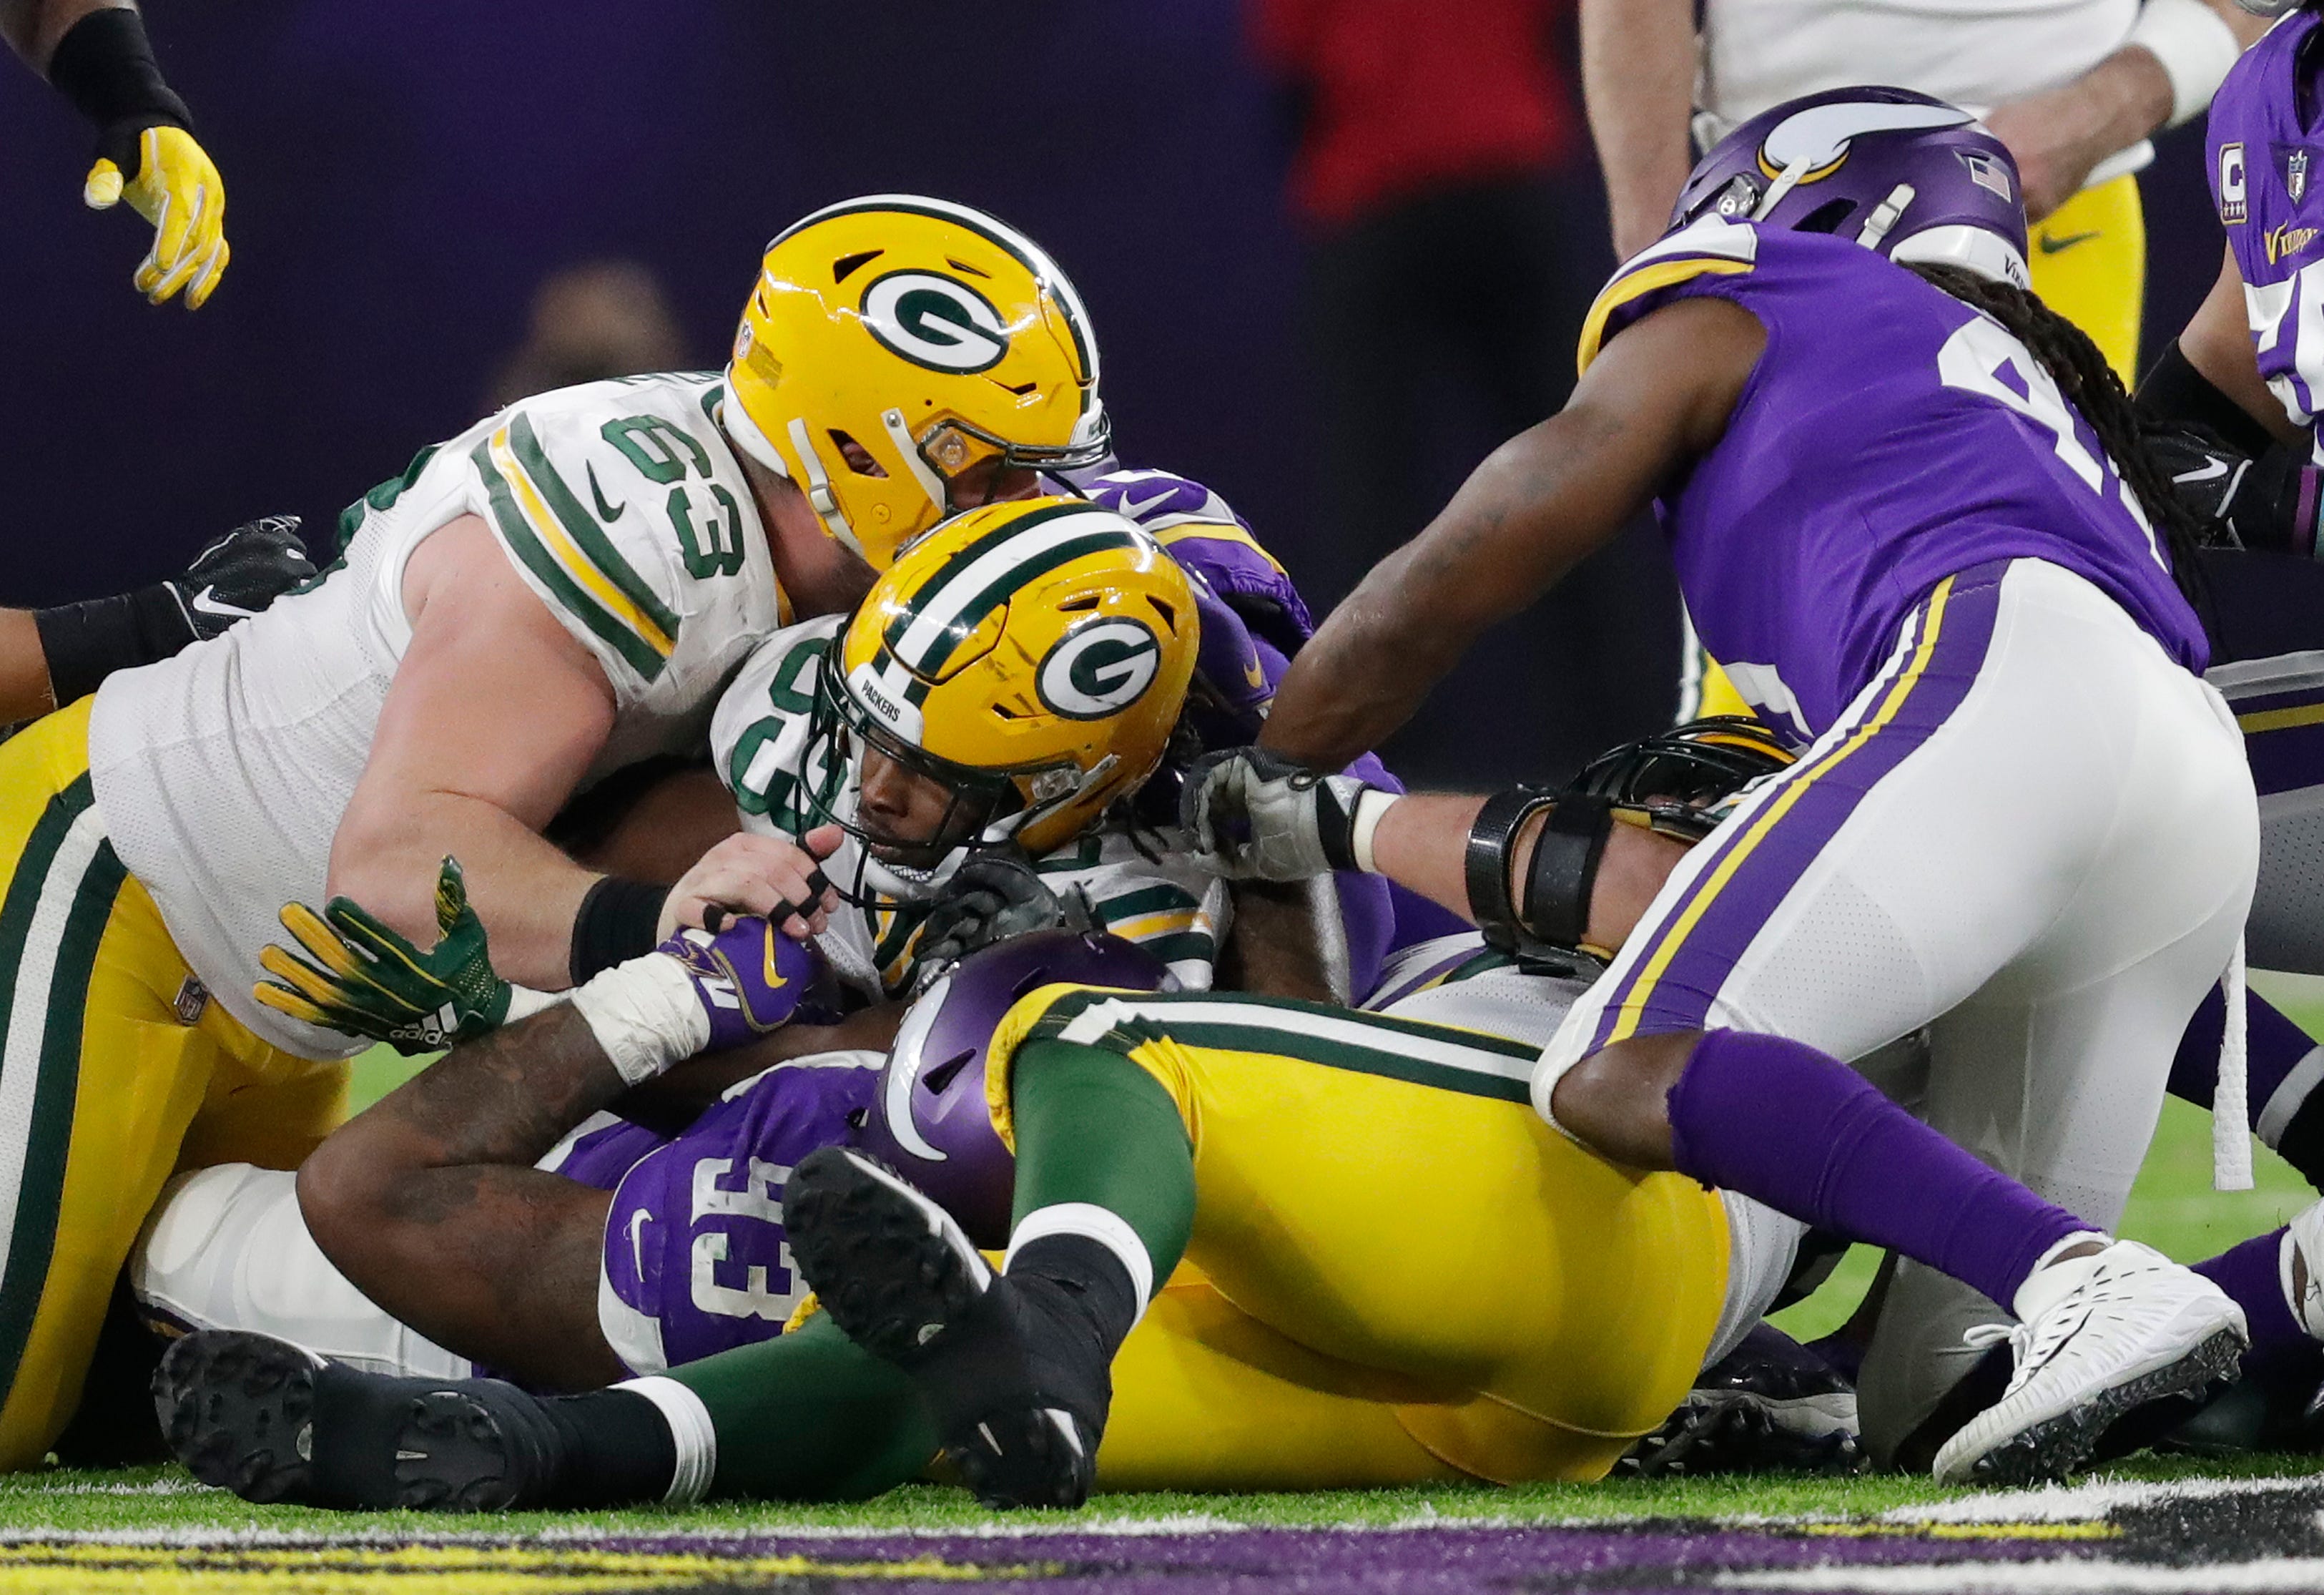 Green Bay Packers running back Aaron Jones (33) can't convert a fourth down in the fourth quarter against the Minnesota Vikings during their football game Sunday, November 25, 2018, at U.S. Bank Stadium in Minneapolis, Minn. 
Dan Powers/USA TODAY NETWORK-Wisconsin